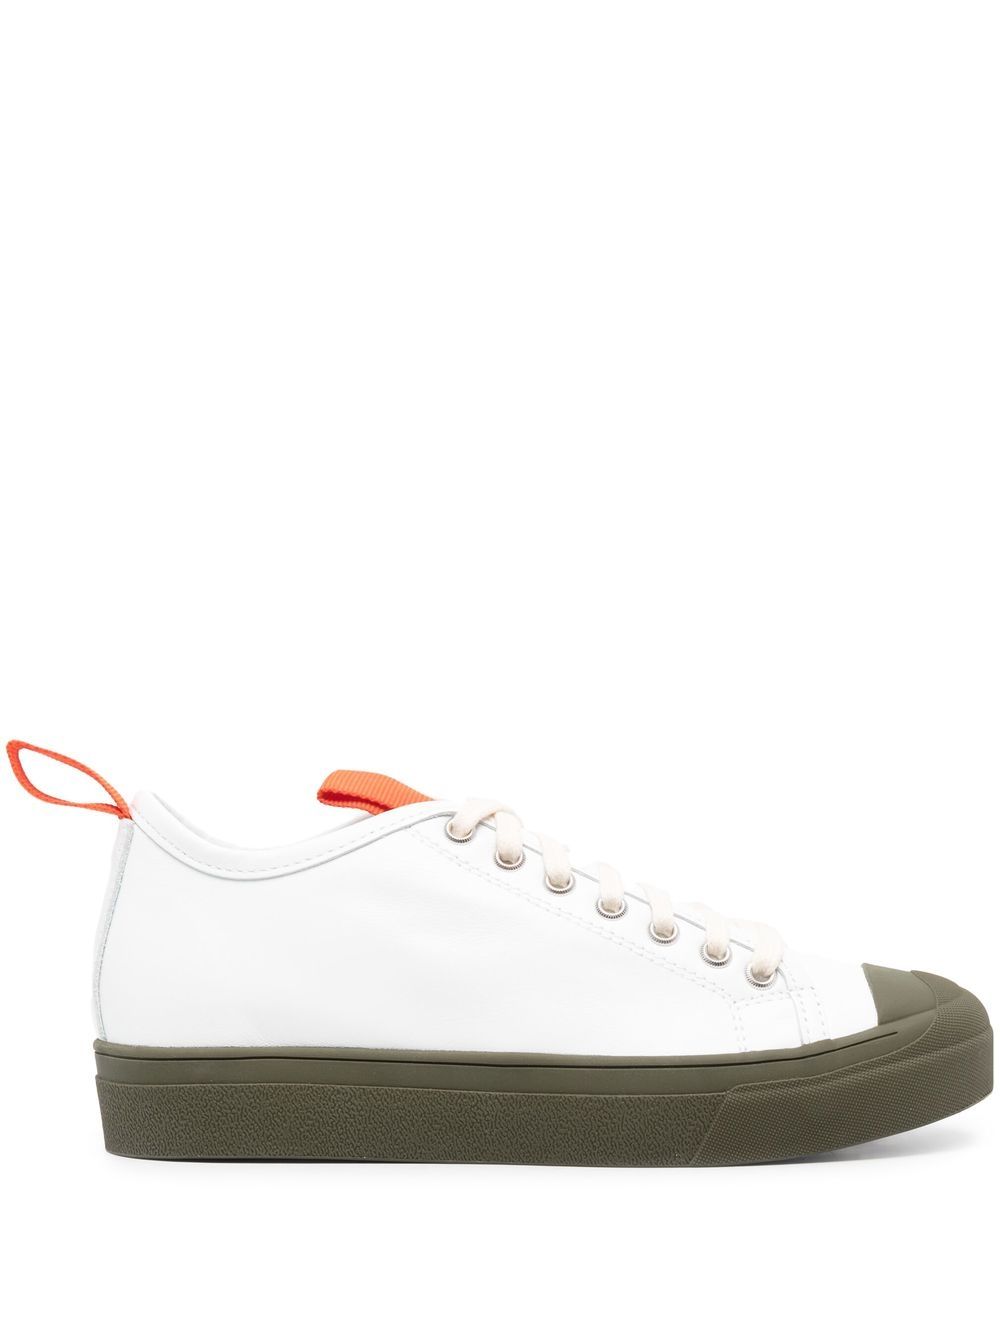 Sofie D'hoore Fable Lace-up Sneakers In White